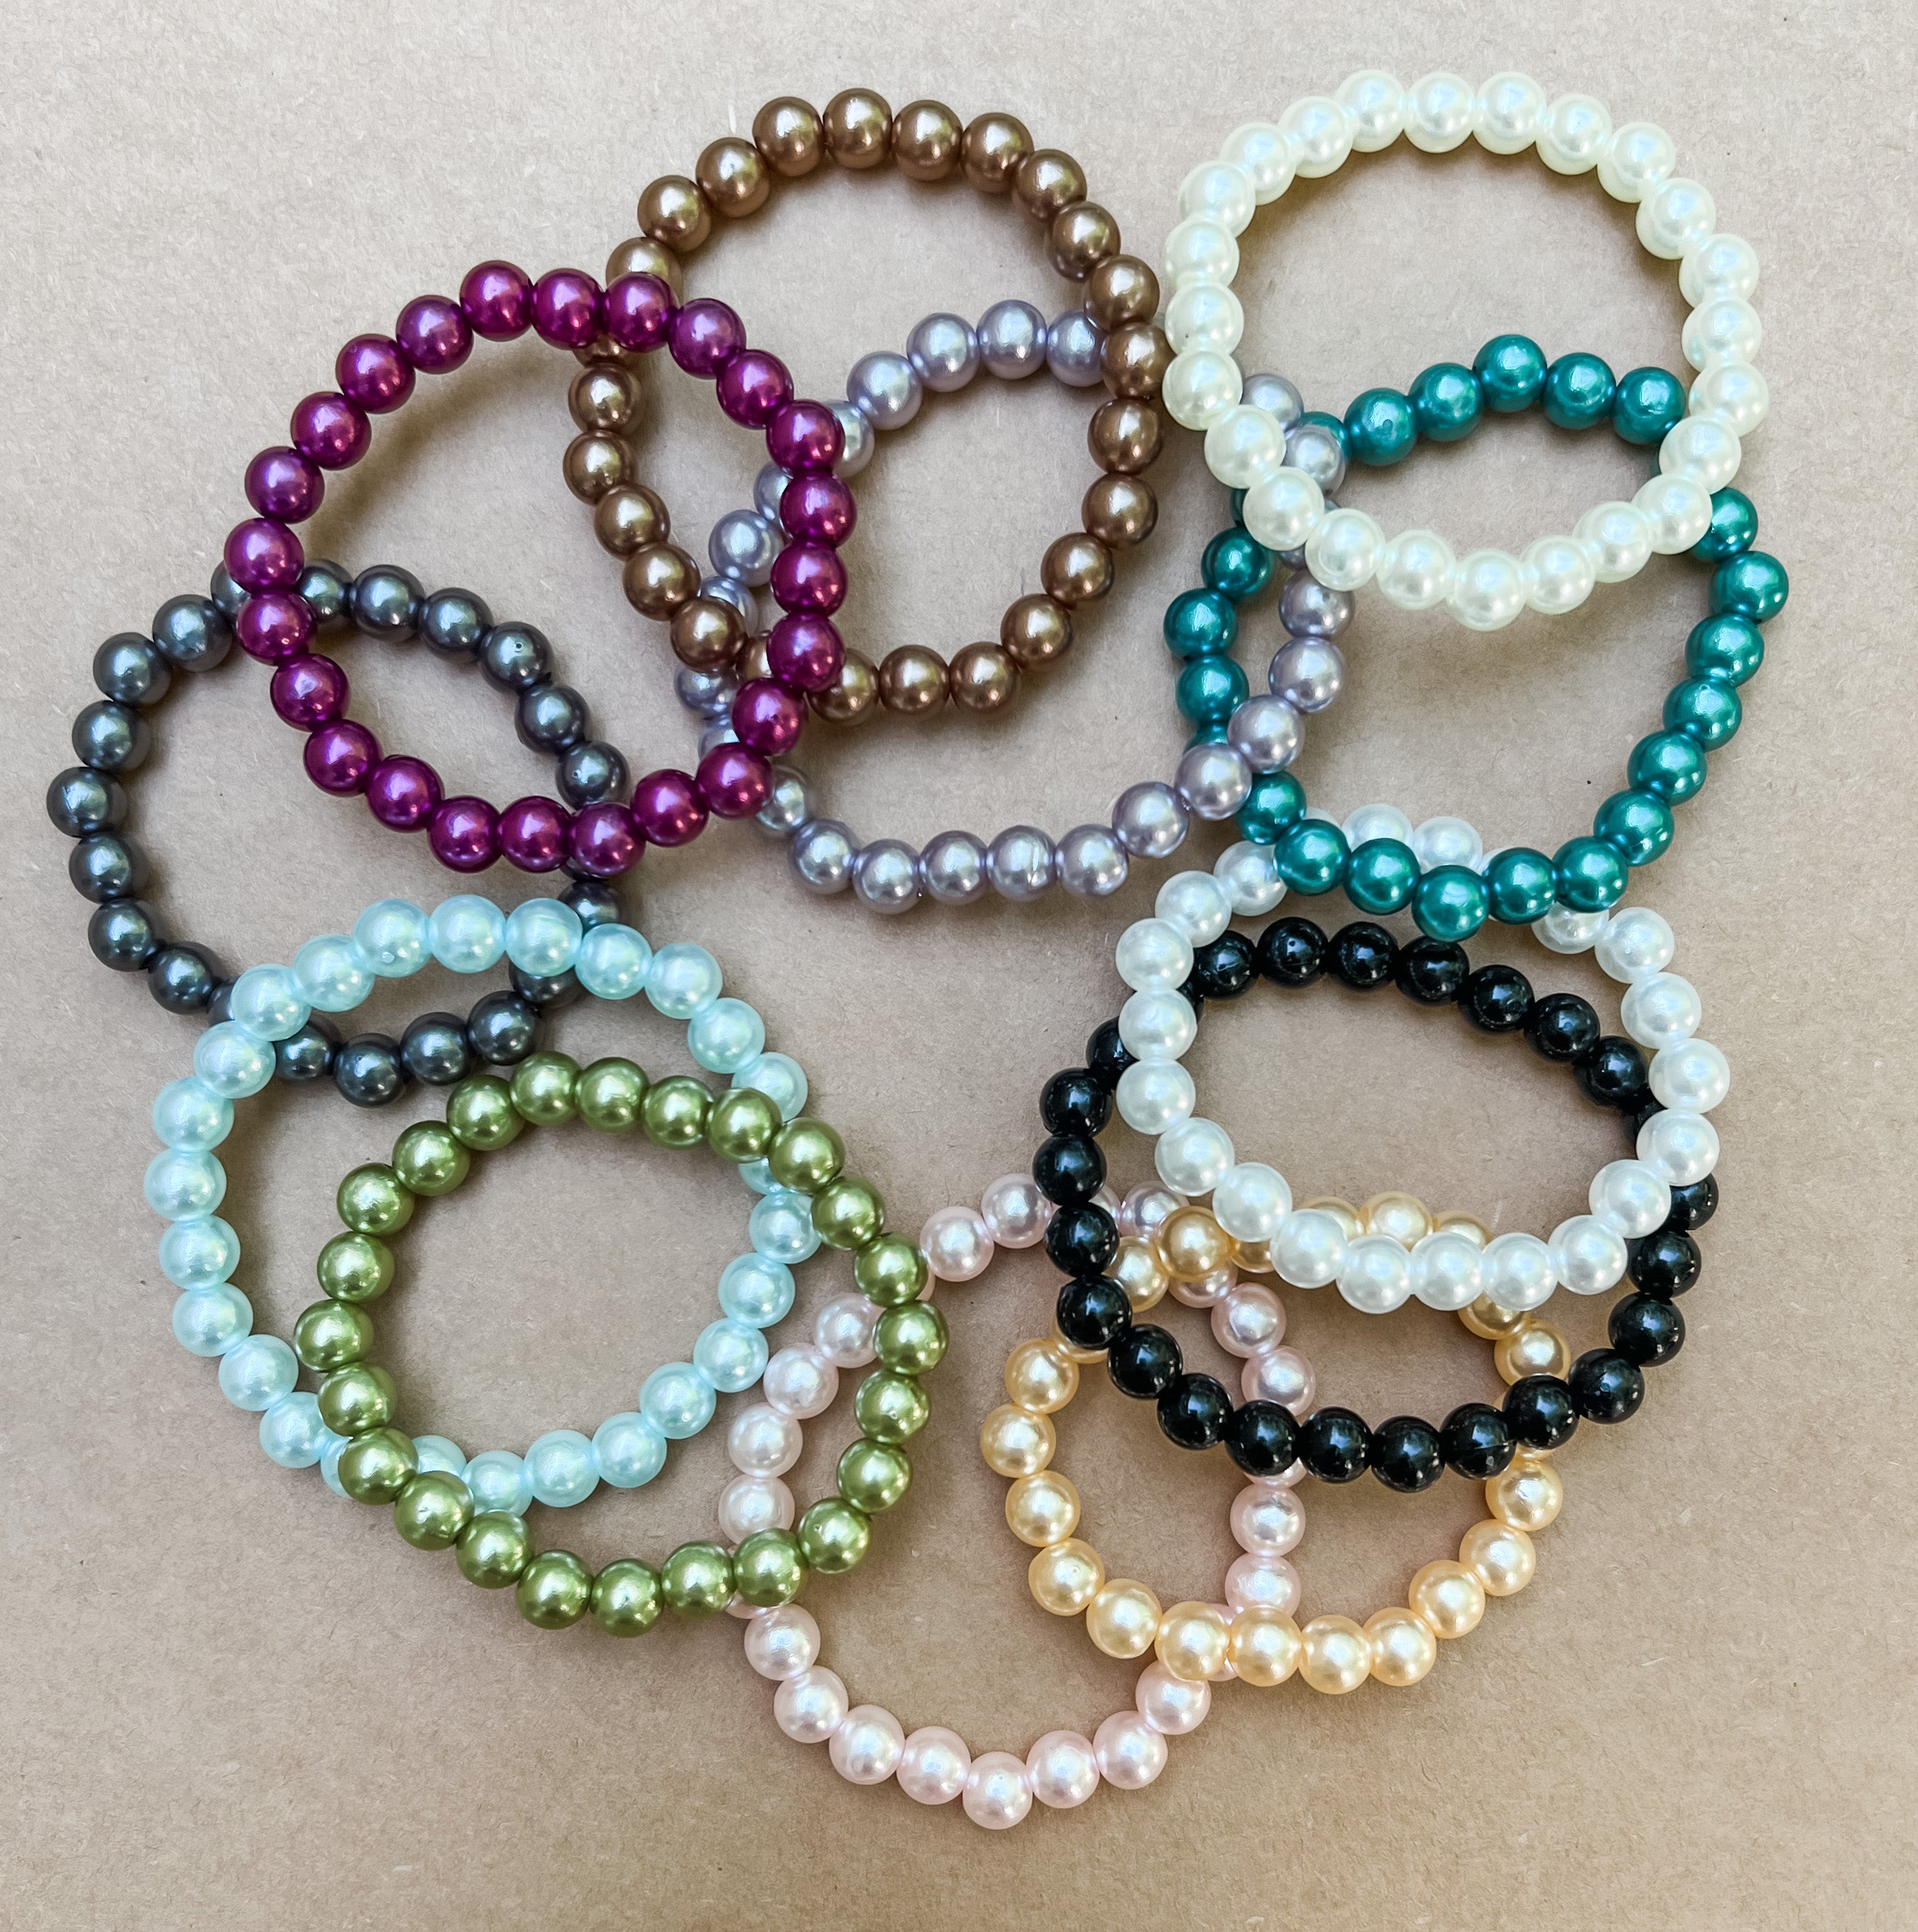 DIY Pearl and Bead Lace Bracelet Cuff